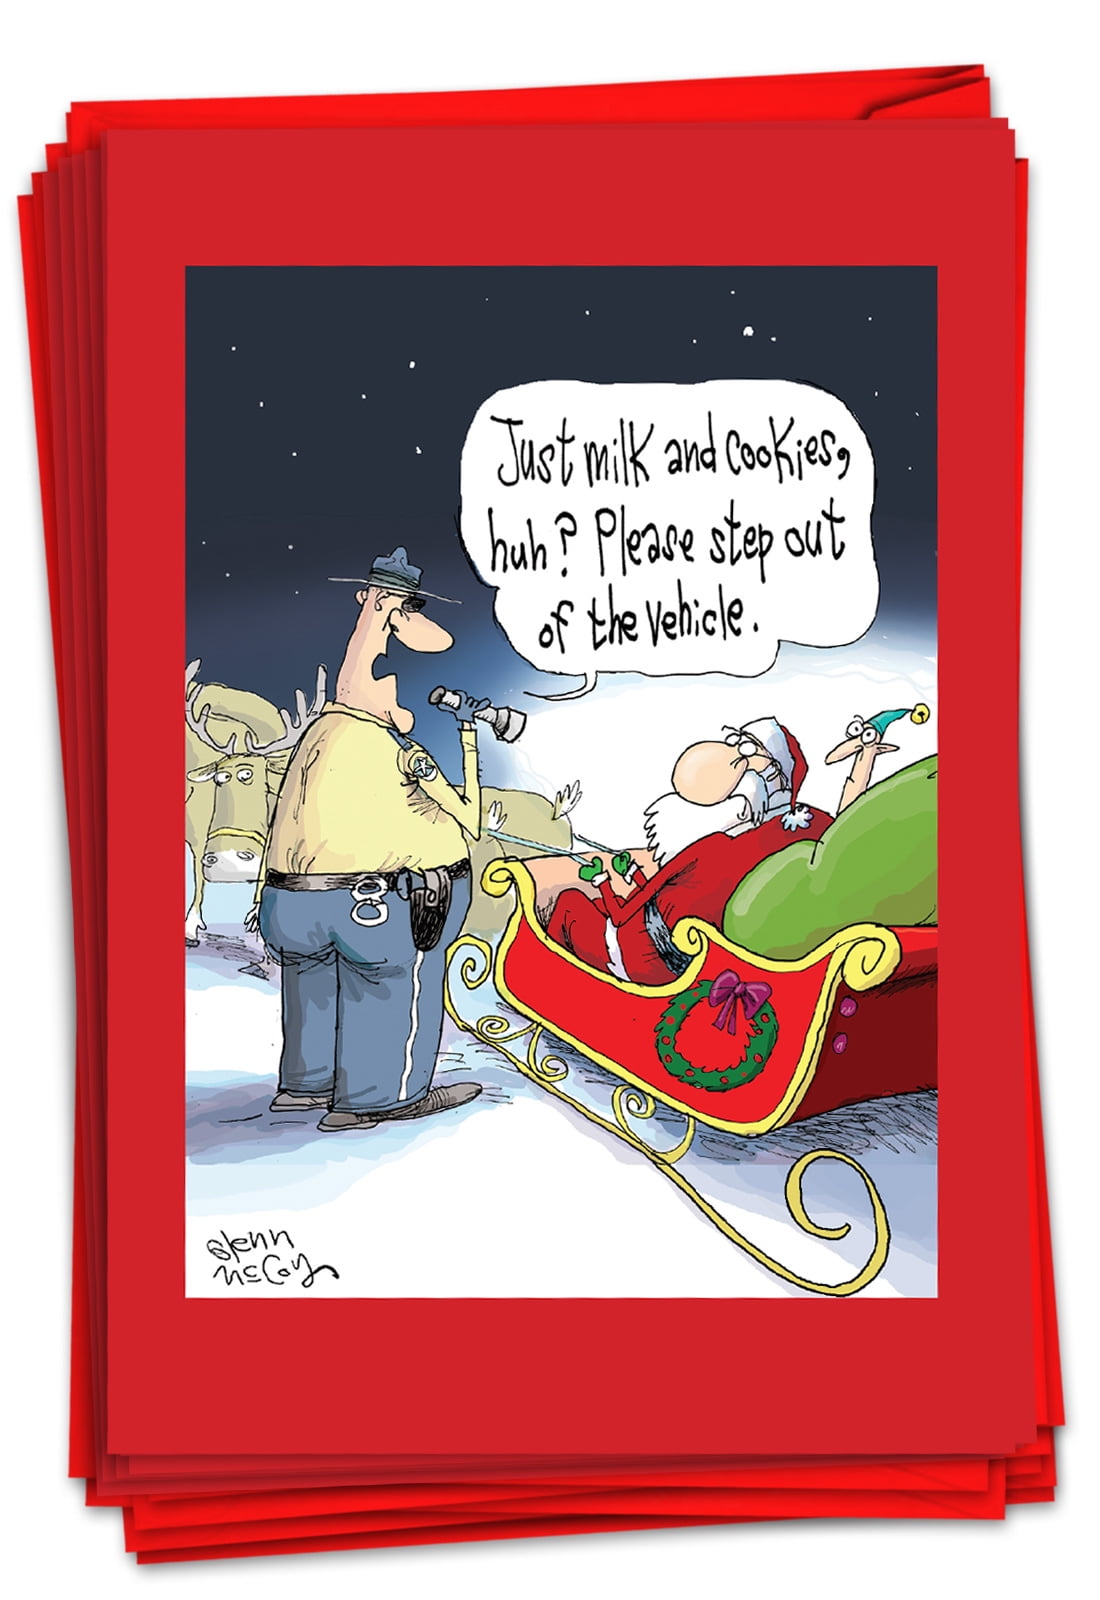 New Surge Protector 12 Funny Boxed Christmas Cards by Nobleworks 